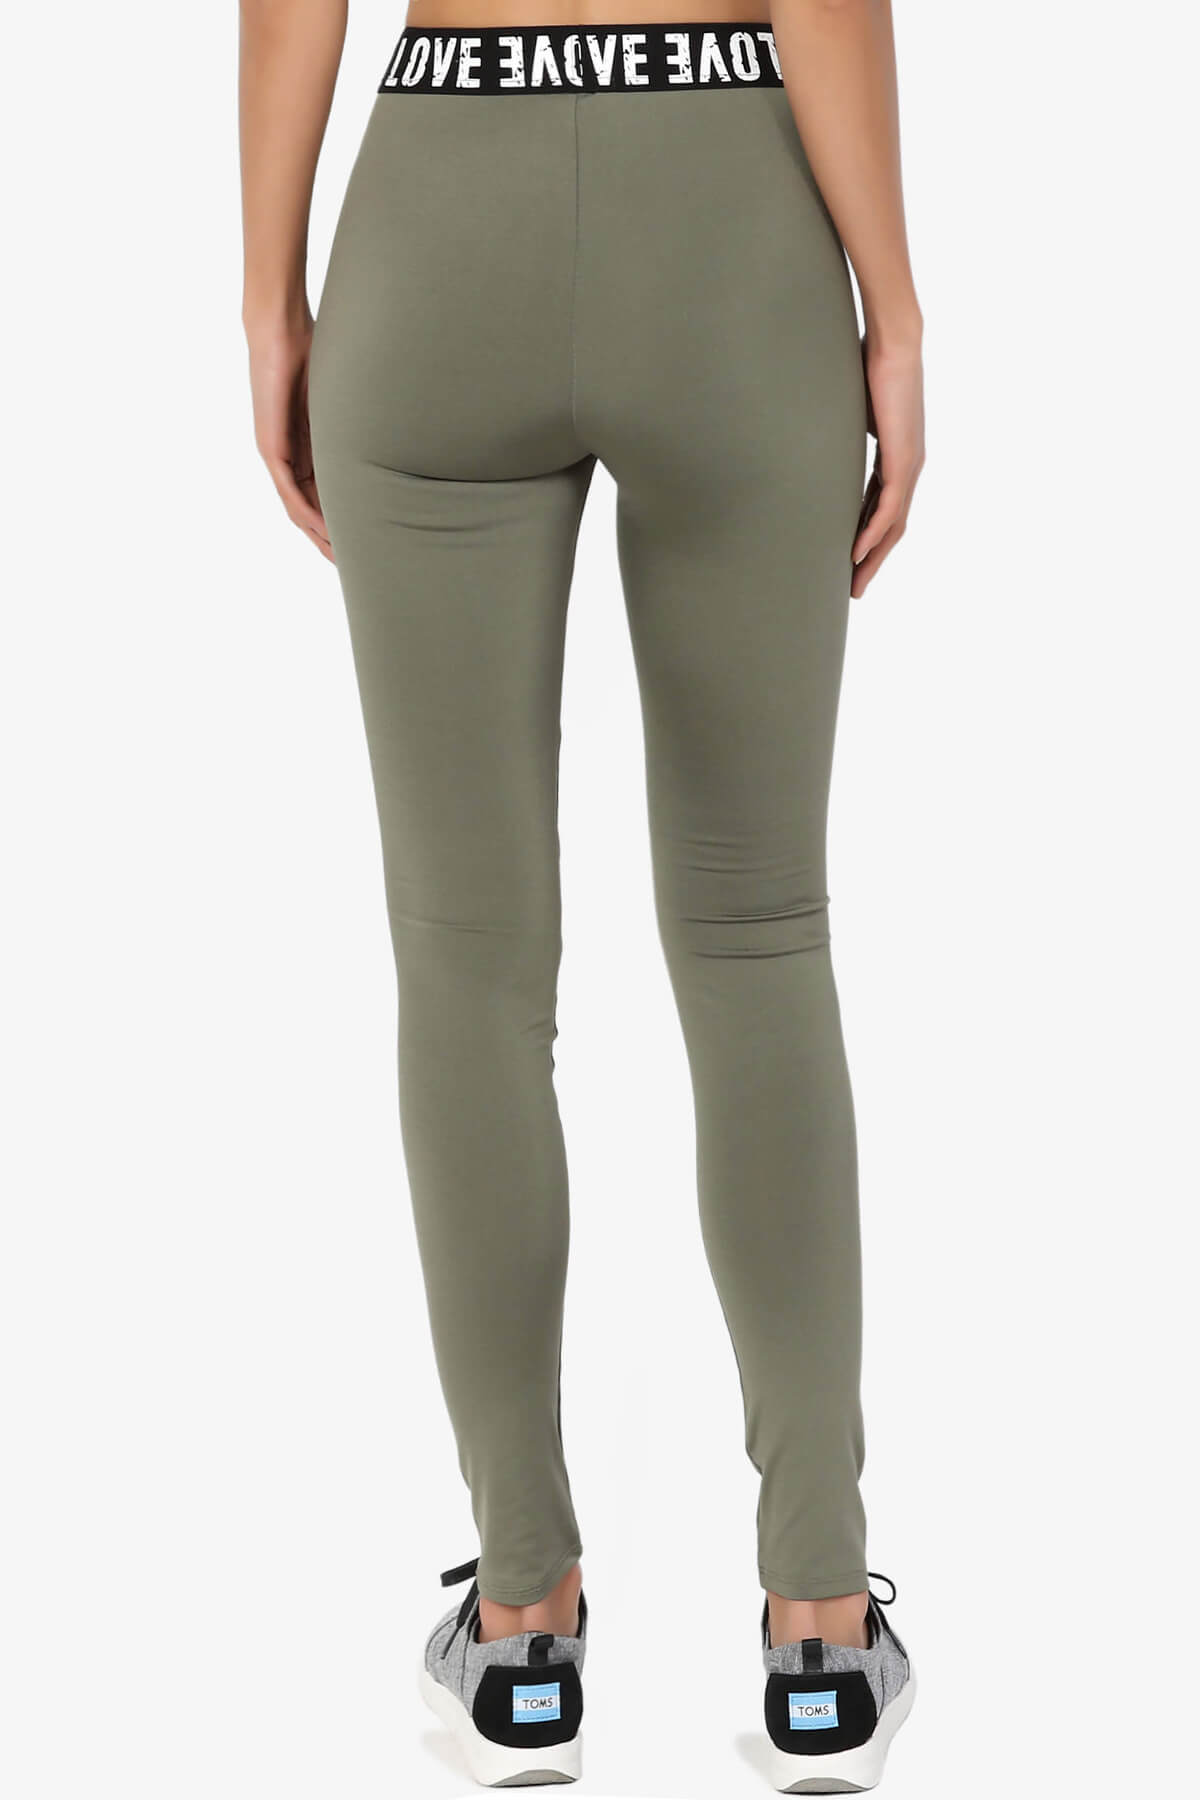 Load image into Gallery viewer, Venture LOVE High Rise Athletic Leggings OLIVE_2
